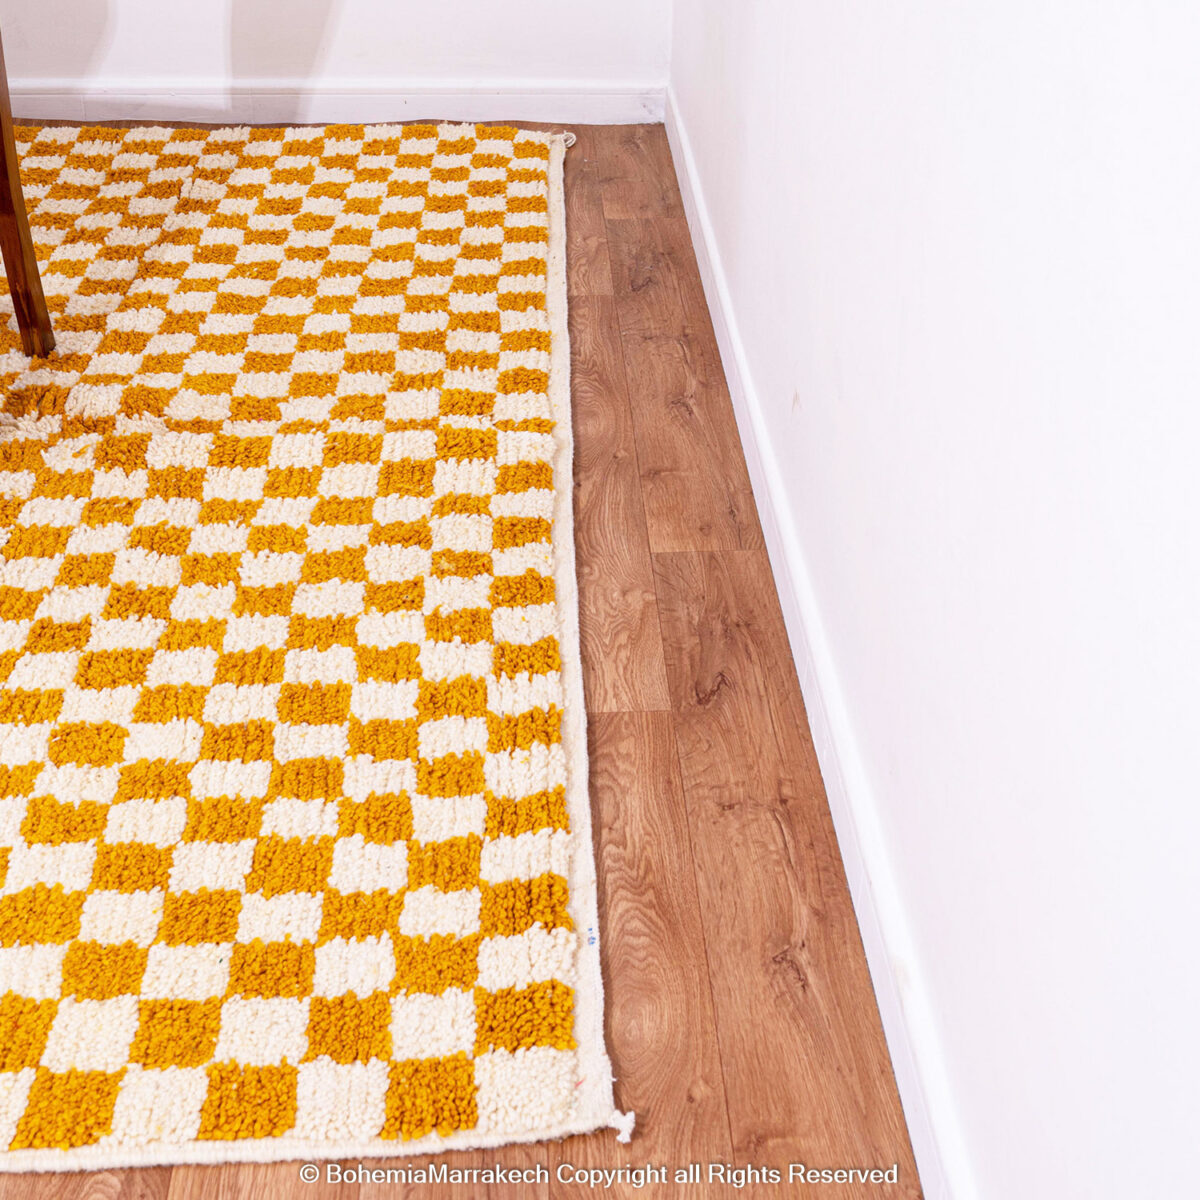 checkered rugs checkered carpet black and white checkered rug black white checkered rug black and white checkered carpet white and black checkered rug black & white checkered rug checkerboard rug checkered area rug area rug checkered checkered jute rug green checkered rug pink checkered rug brown checkered rug beige checkered rug checkered outdoor rug checkered rug 8x10 checkered bath mat outdoor checkered rug outdoor rug checkered checkered shag rug blue checkered rug blue plaid rug plaid rug 8x10 ruggable checkered rug black checkered rug black check rug outdoor plaid rugs black check carpet neutral checkered rug tan checkered rug green plaid rug buffalo check rugs washable checkered rug cream checkered rug orange checkered rug diamond checkered rug large checkered rug urban outfitters checkered rug checkered bath rug jute checkered rug white checkered rug brown and white checkered rug plaid rug 9x12 tan and white checkered rug 8x10 checkered rug green and white checkered rug pink and white checkered rug round checkered rug black and white plaid rug